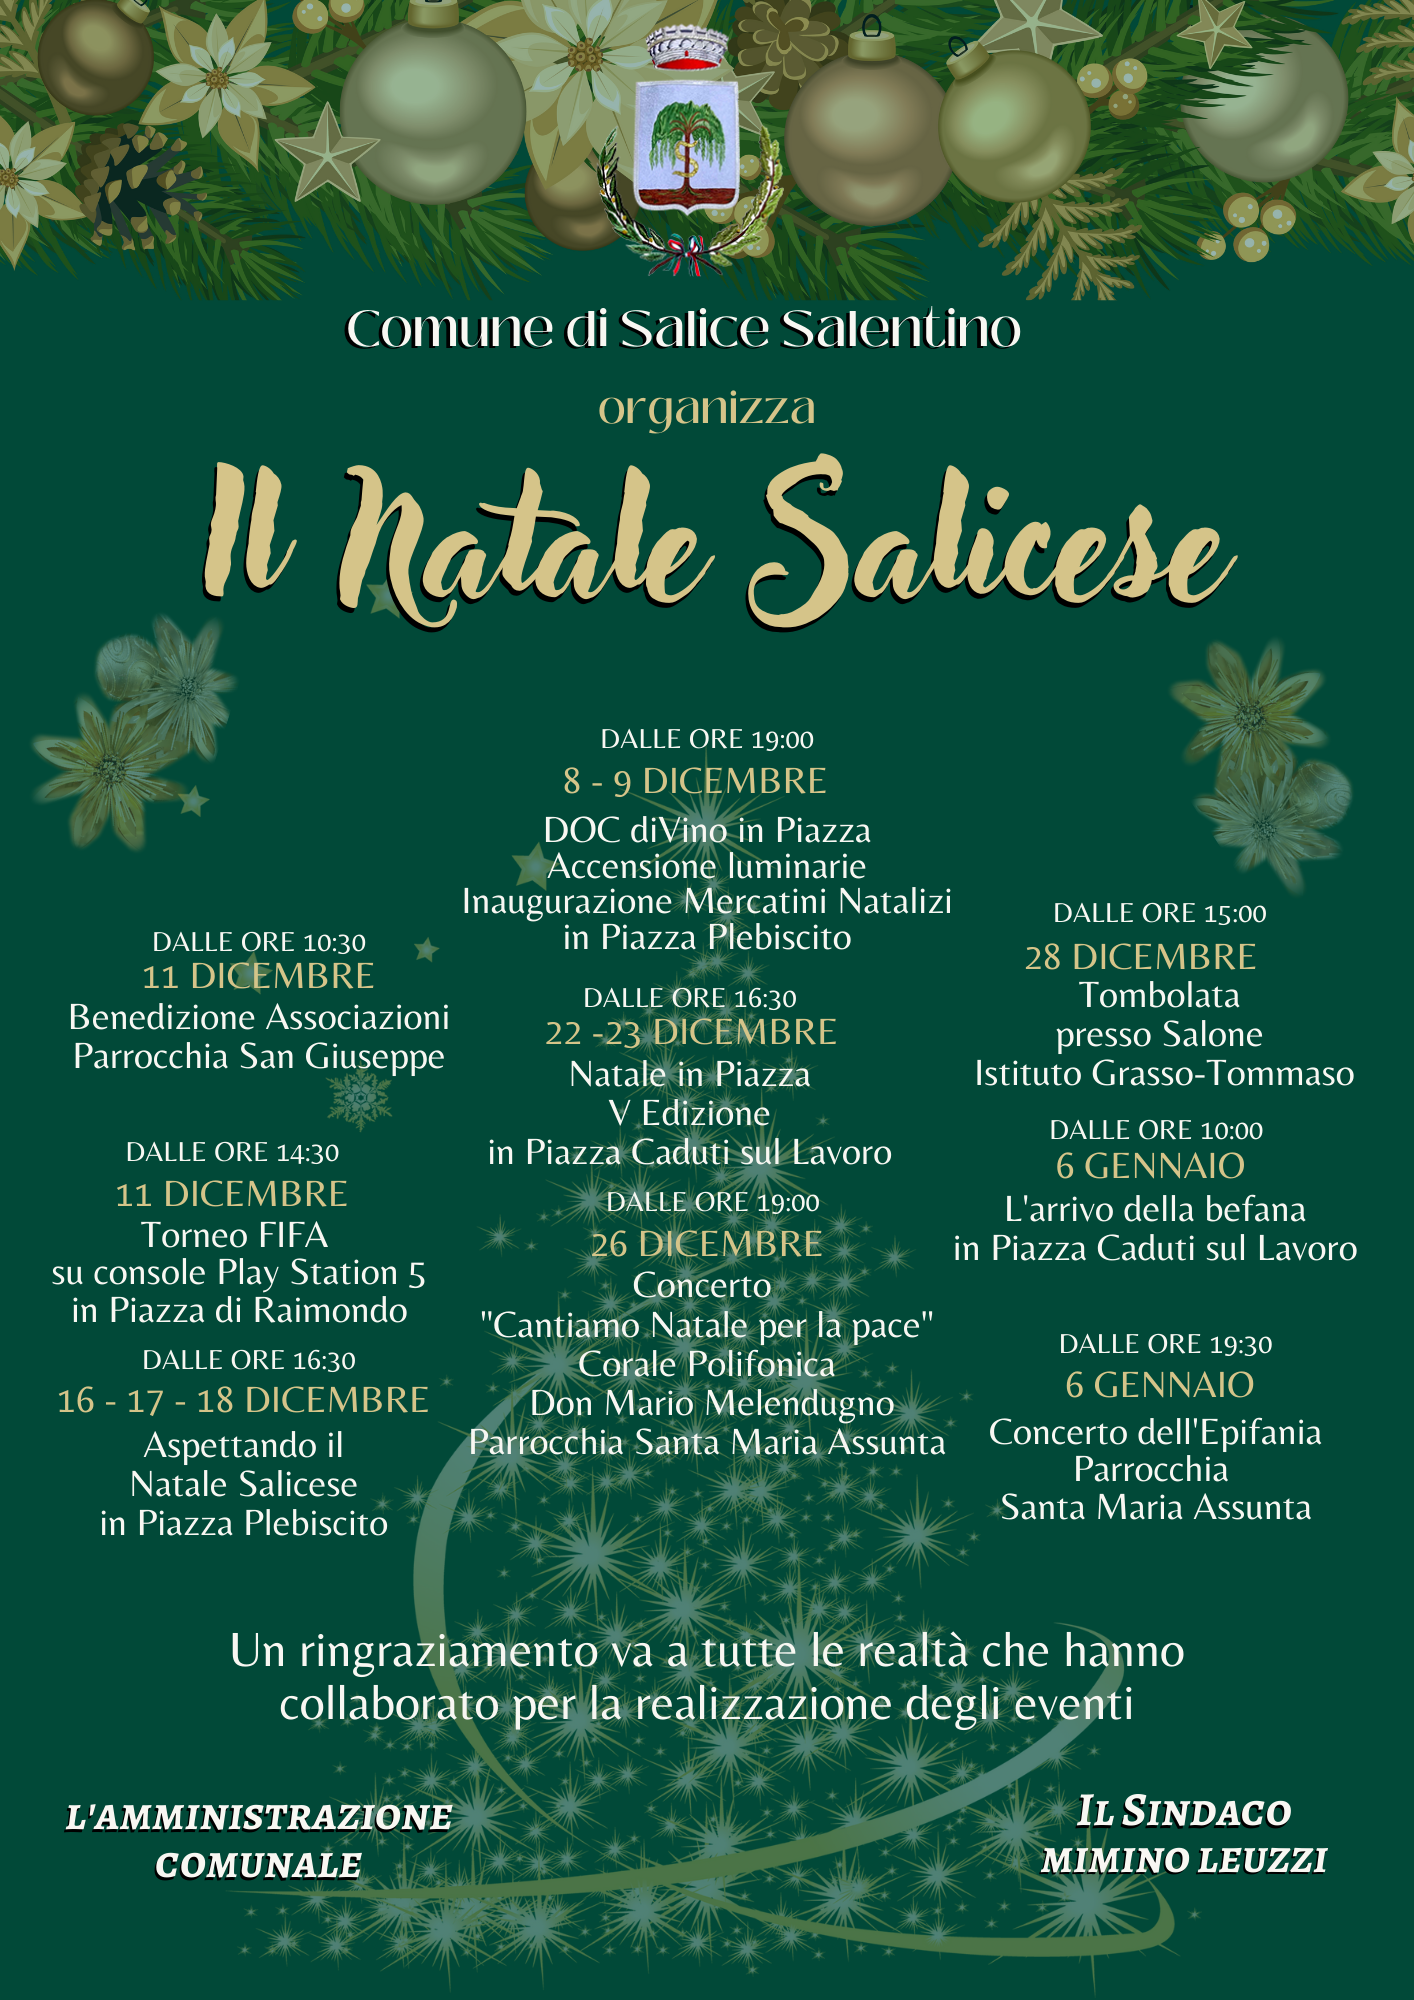 Il Natale Salicese